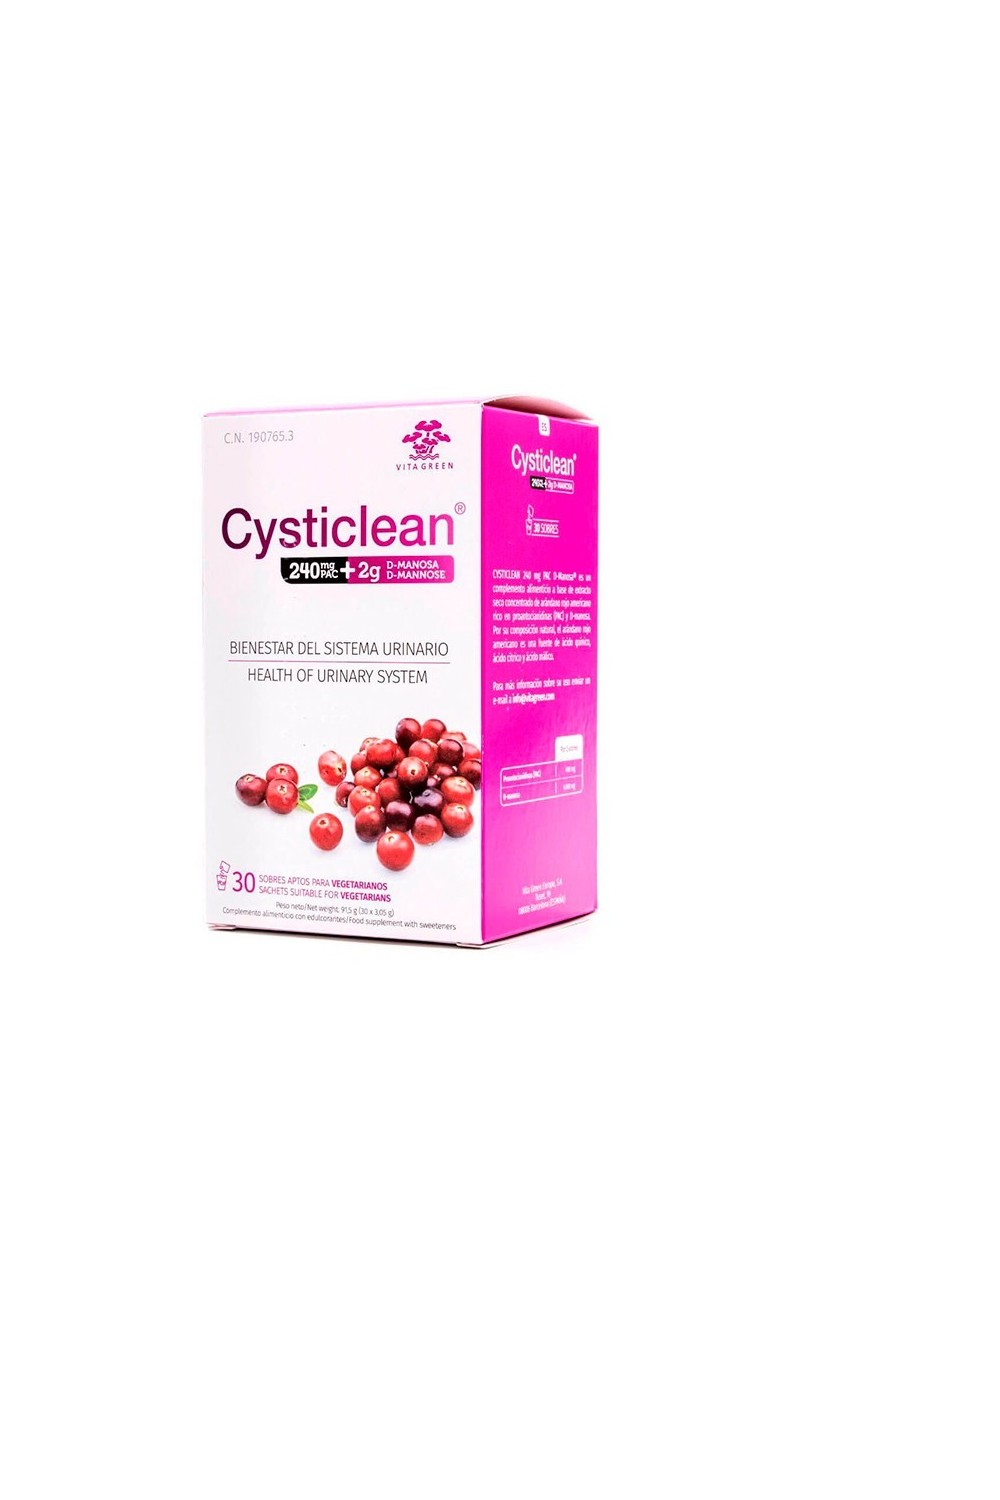 Cysticlean Urinary System Wellness 30 Sachets 240mg